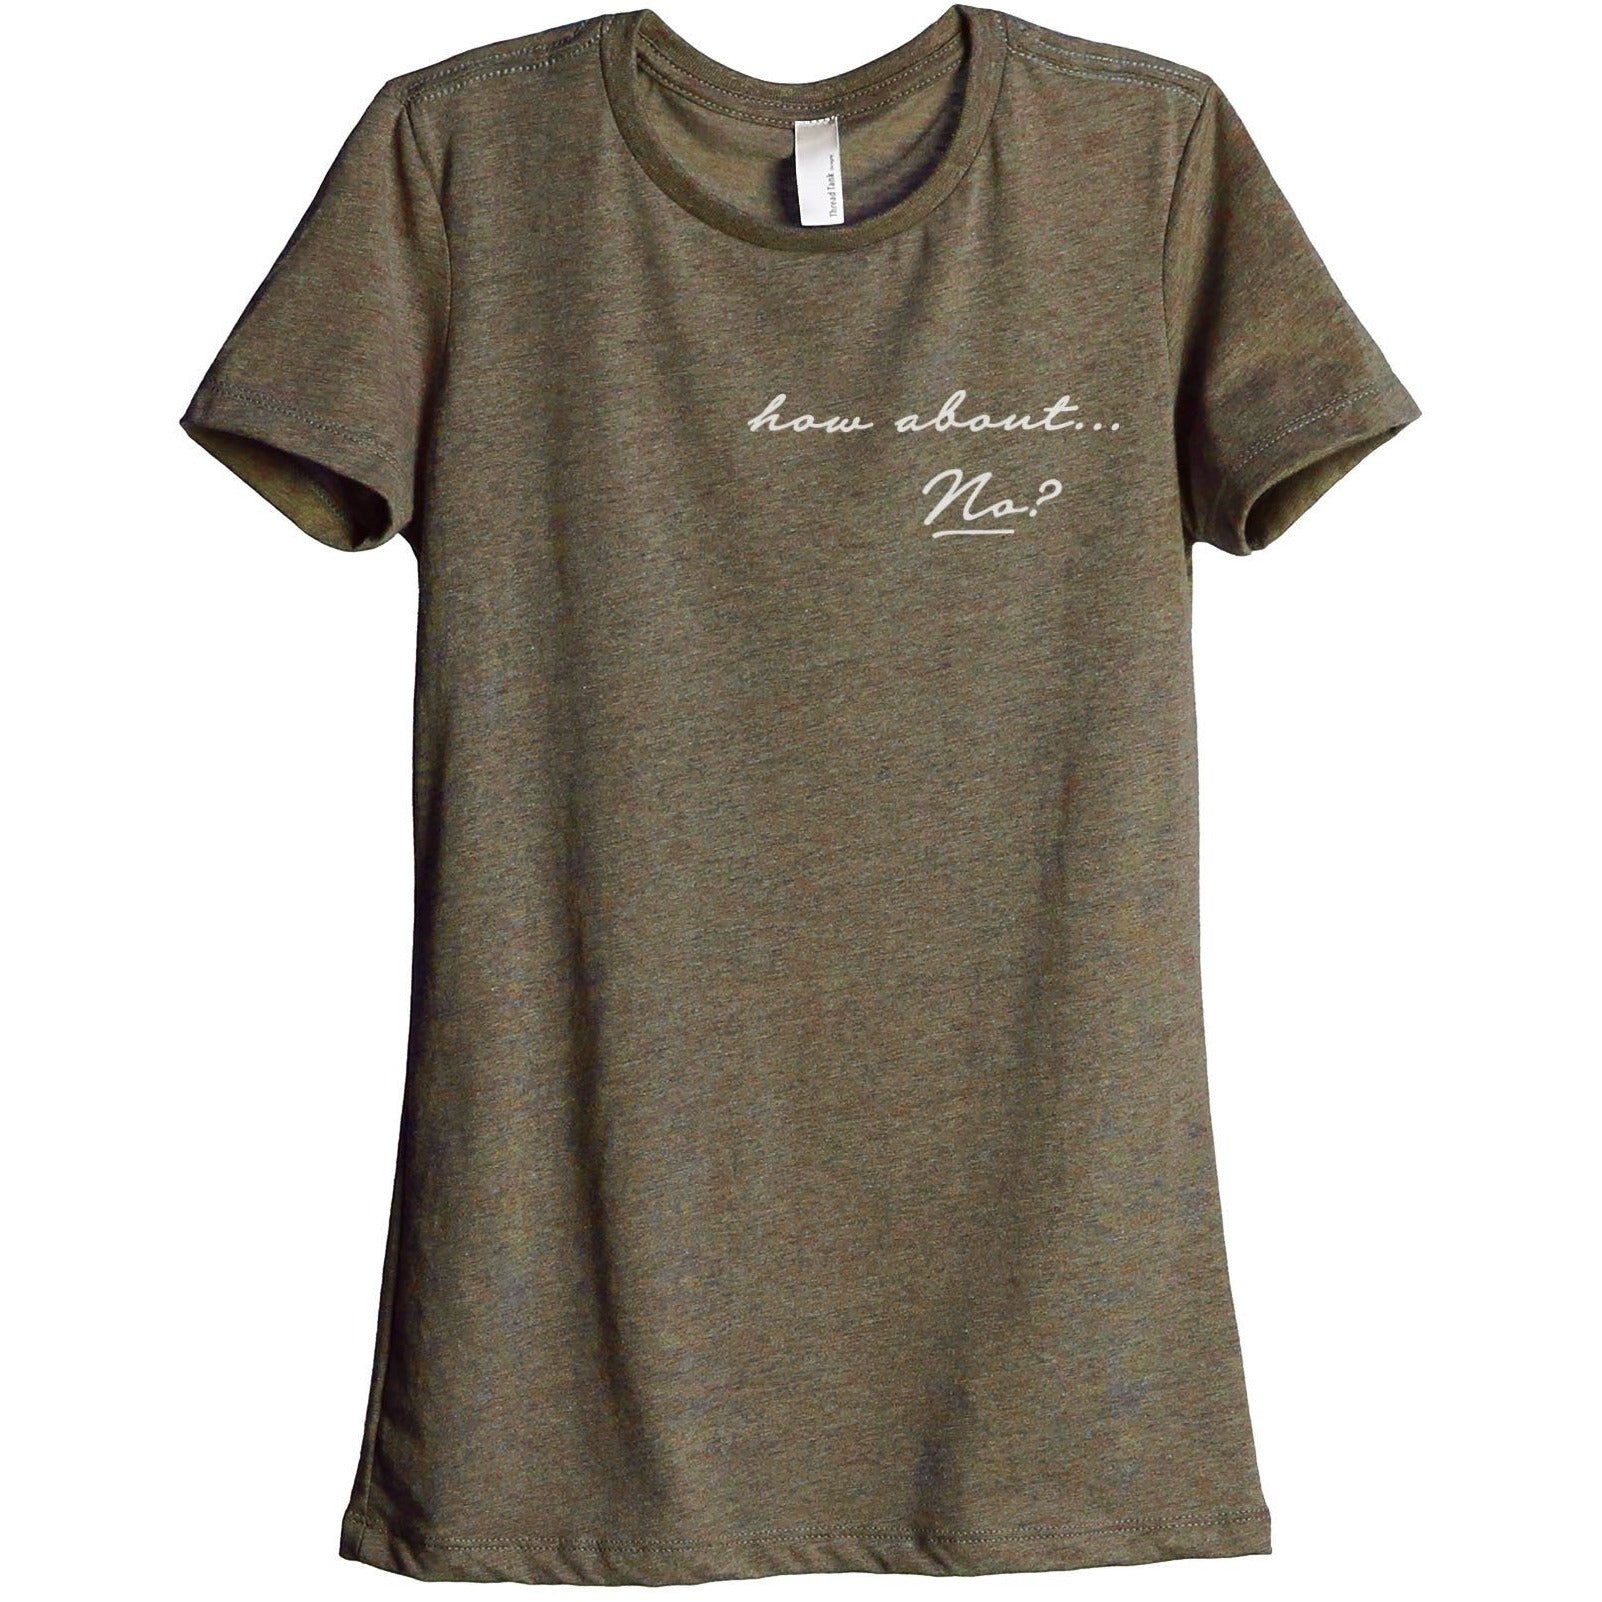 How About No Women's Relaxed Crewneck T-Shirt Top Tee Heather Sage